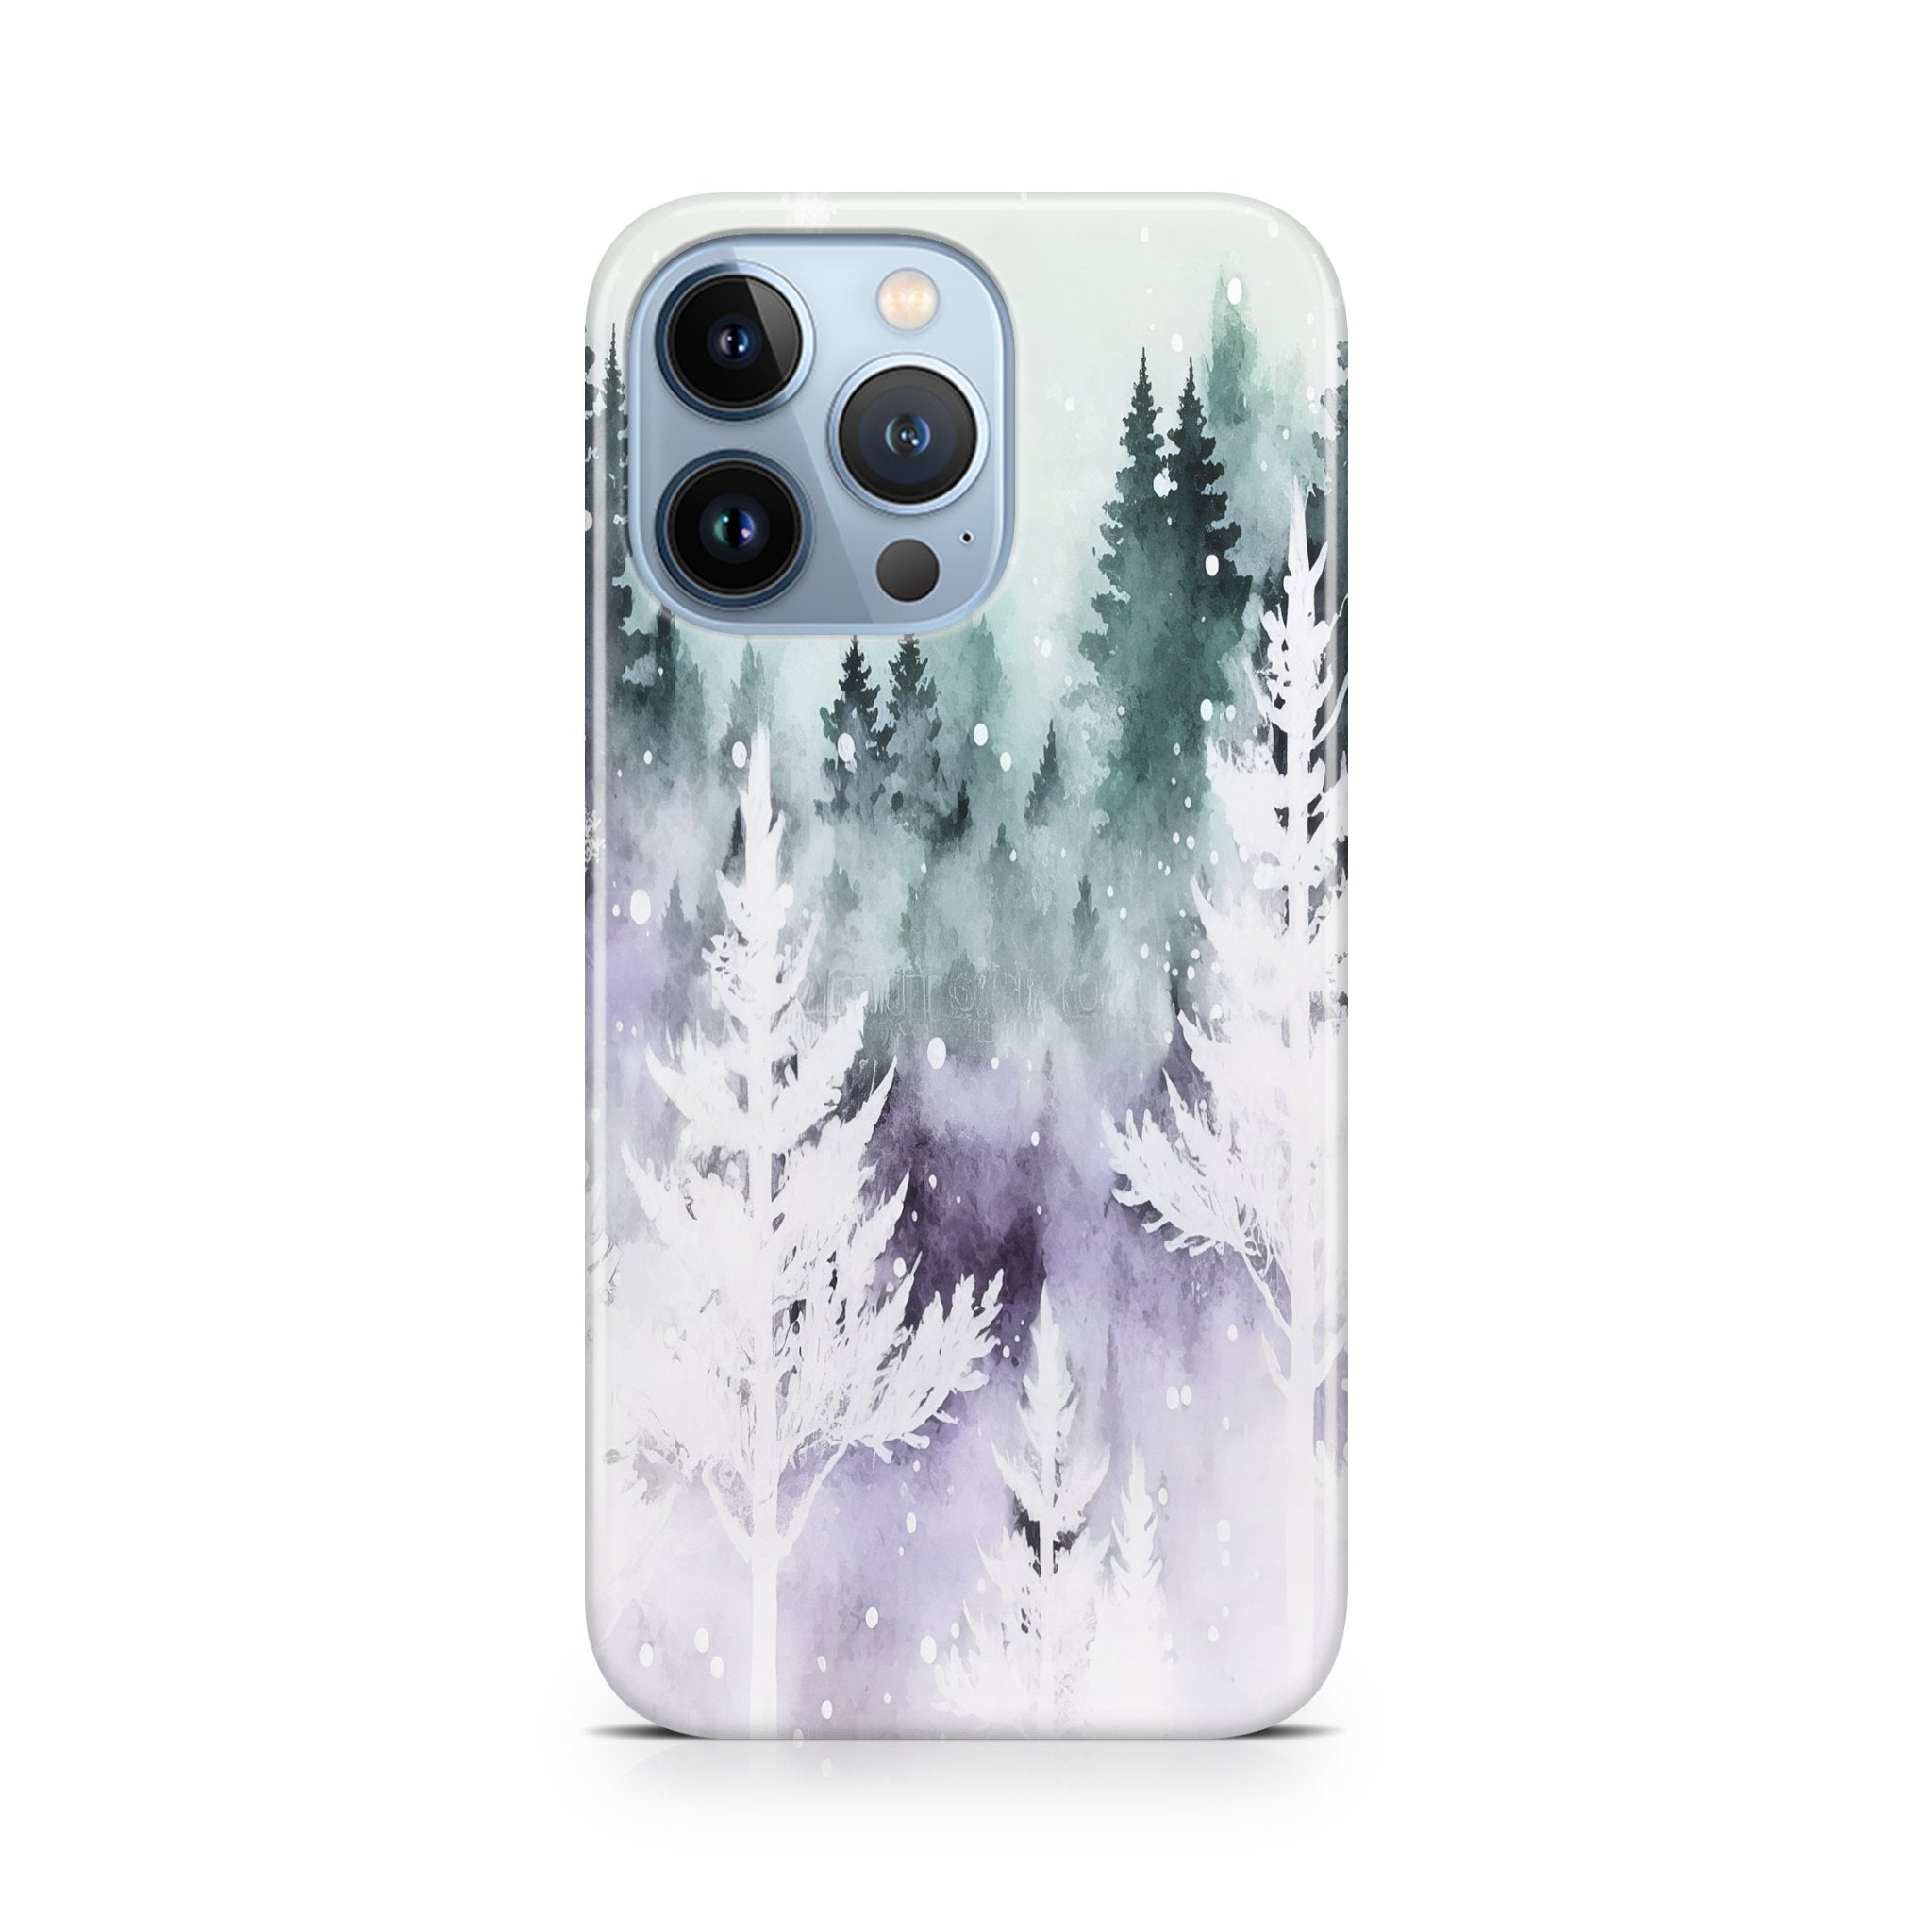 Cloudy Forest - iPhone phone case designs by CaseSwagger